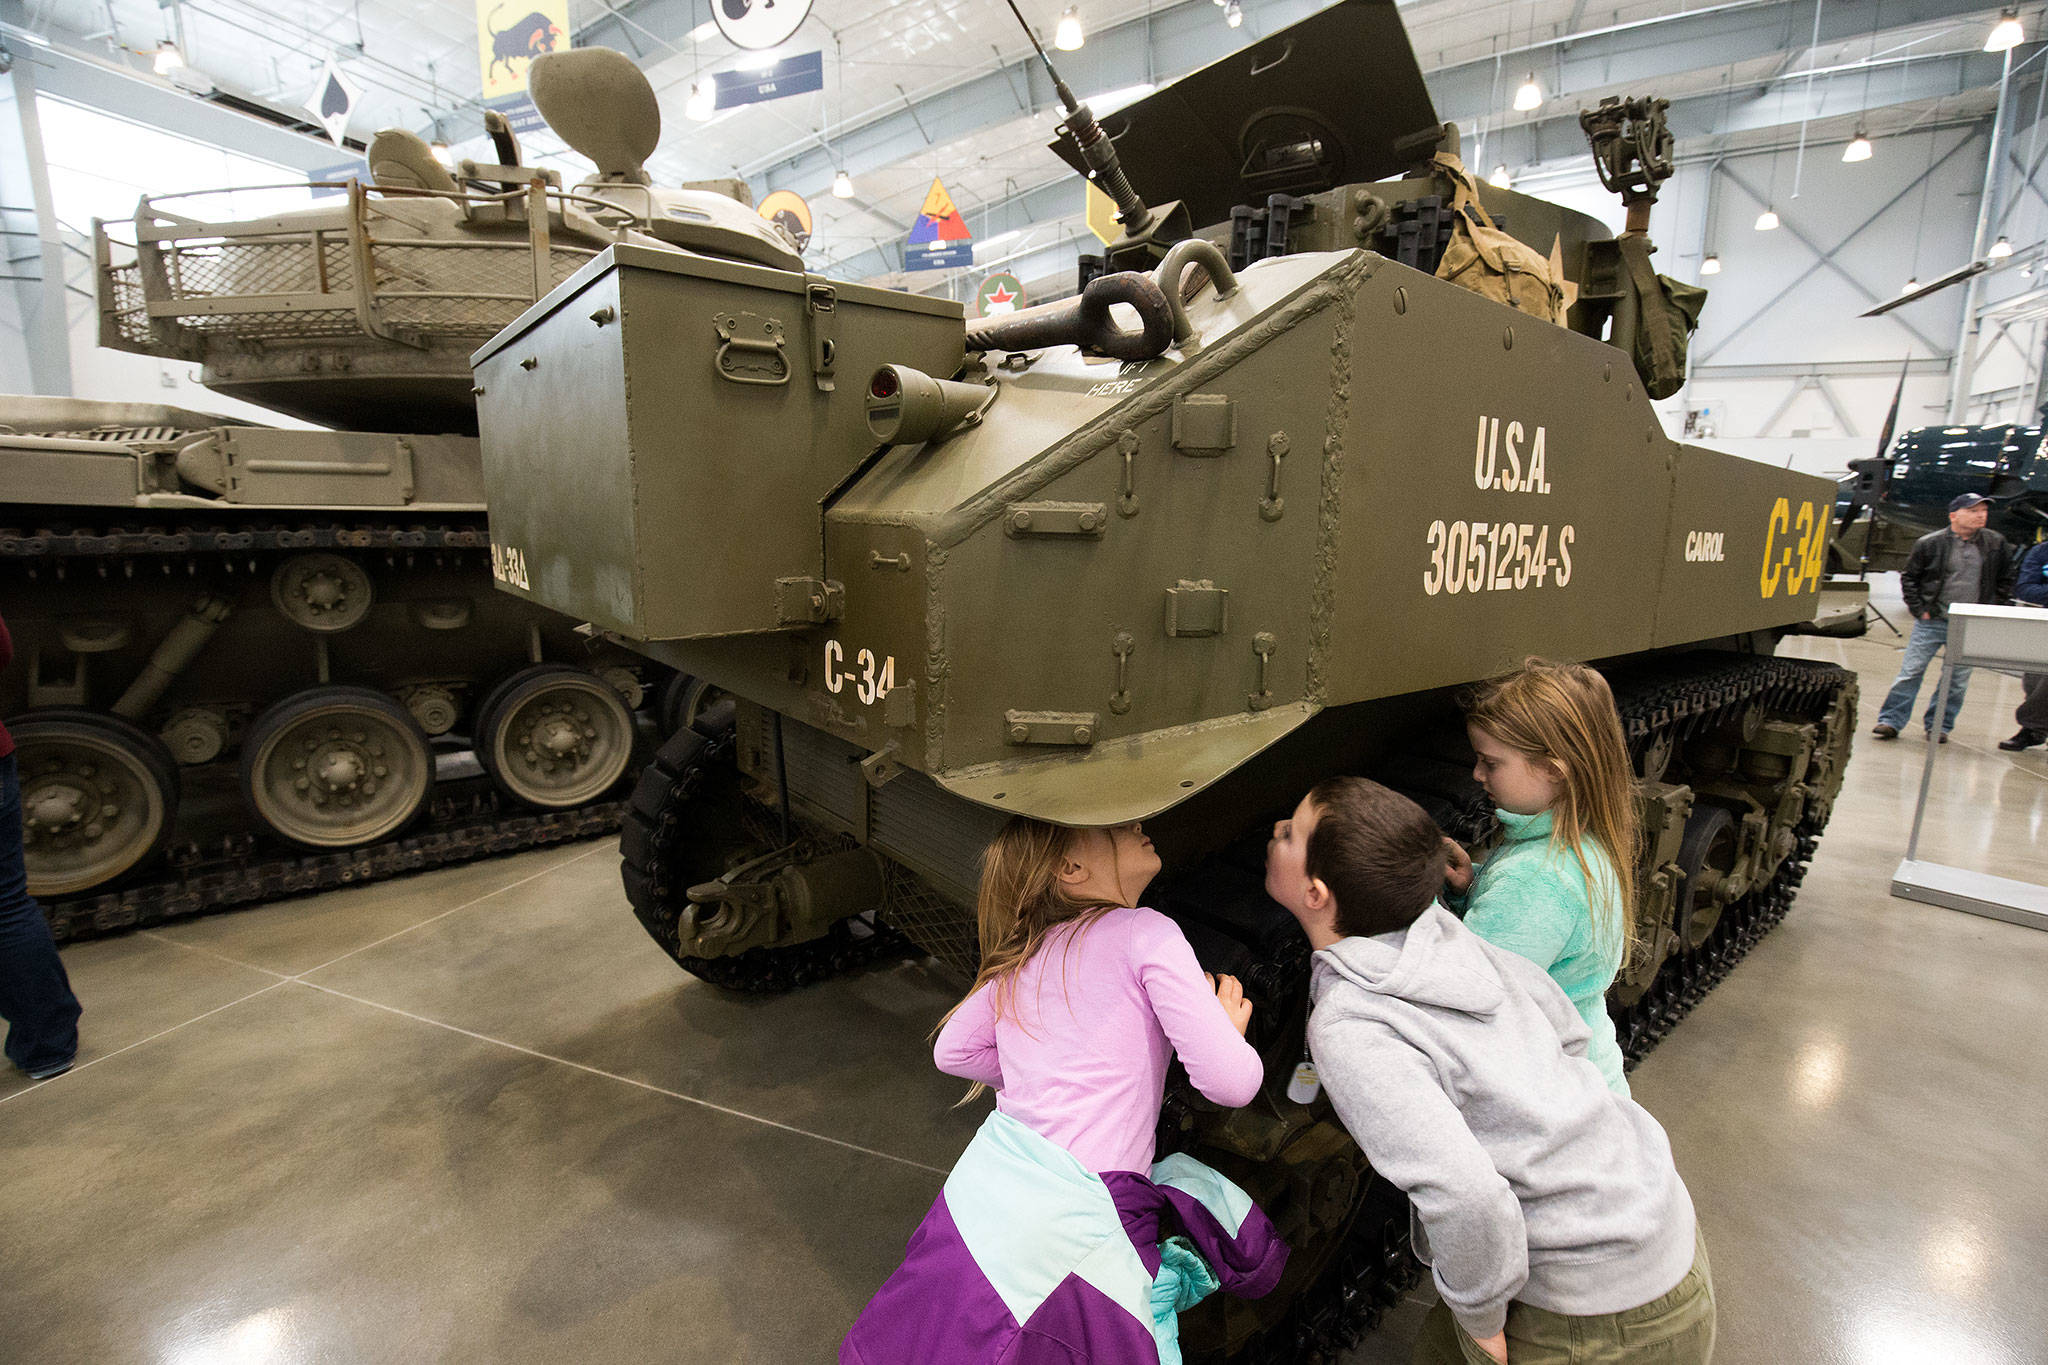 Eli Spaun, 5, Vin Capelli, 7, and Zoe Spaun, 7, right, peer at the underside of a M5A1 Stuart Light Tank in the new 30,000-square-foot hangar at the Flying Heritage & Combat Armor Museum at Paine Field on Saturday, Nov. 10, 2018 in Everett, Wa. The new hangar allows visitors a closer and touchable engagement with the museum’s armored vehicles. (Andy Bronson / The Herald)